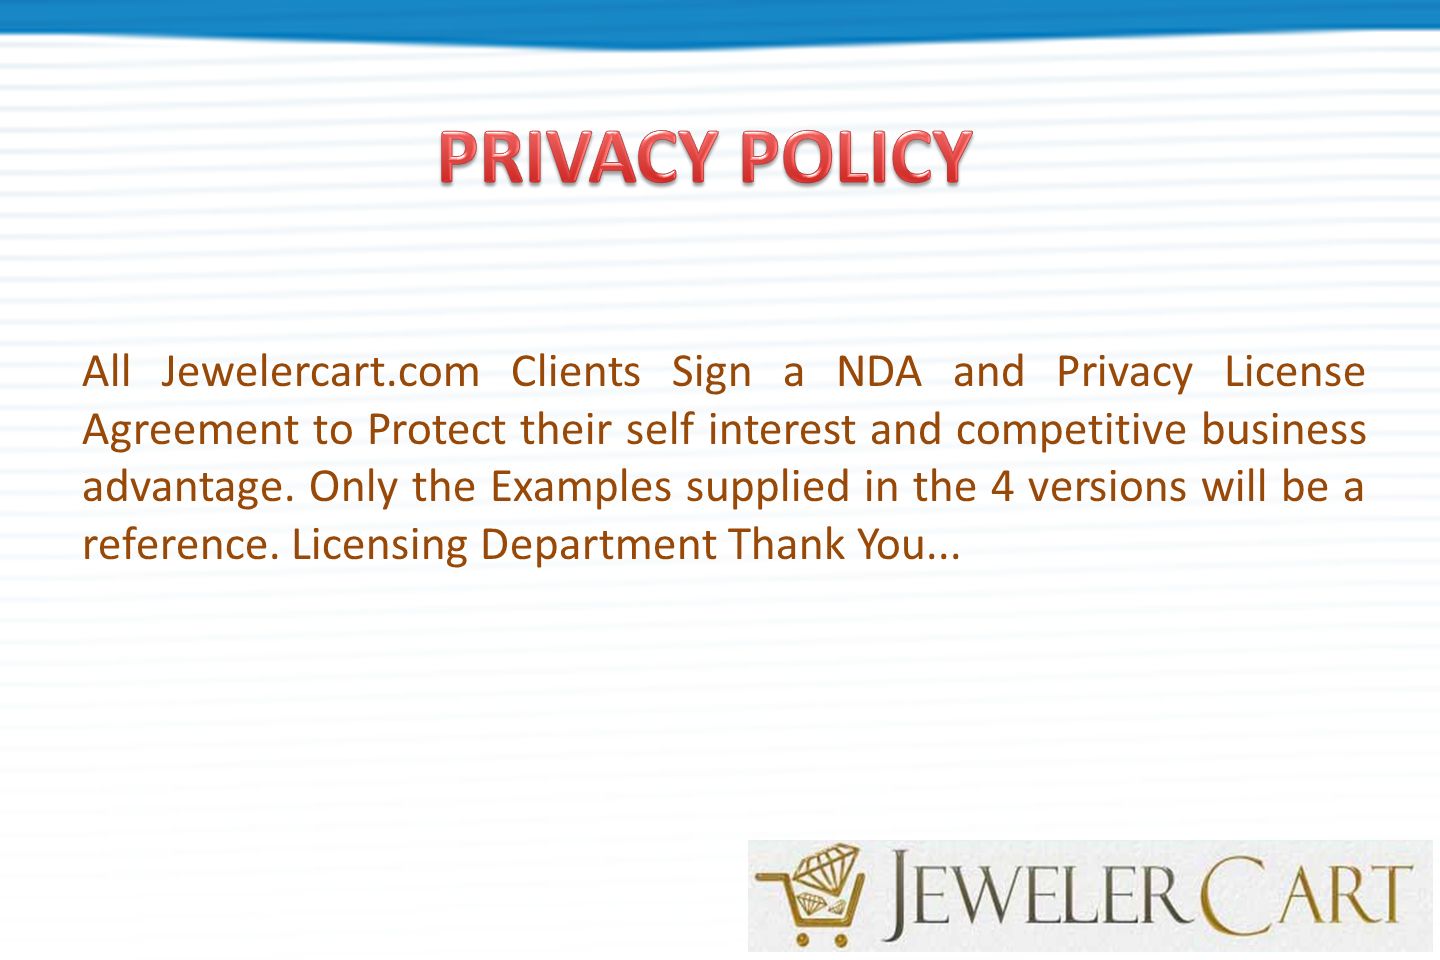 All Jewelercart.com Clients Sign a NDA and Privacy License Agreement to Protect their self interest and competitive business advantage.